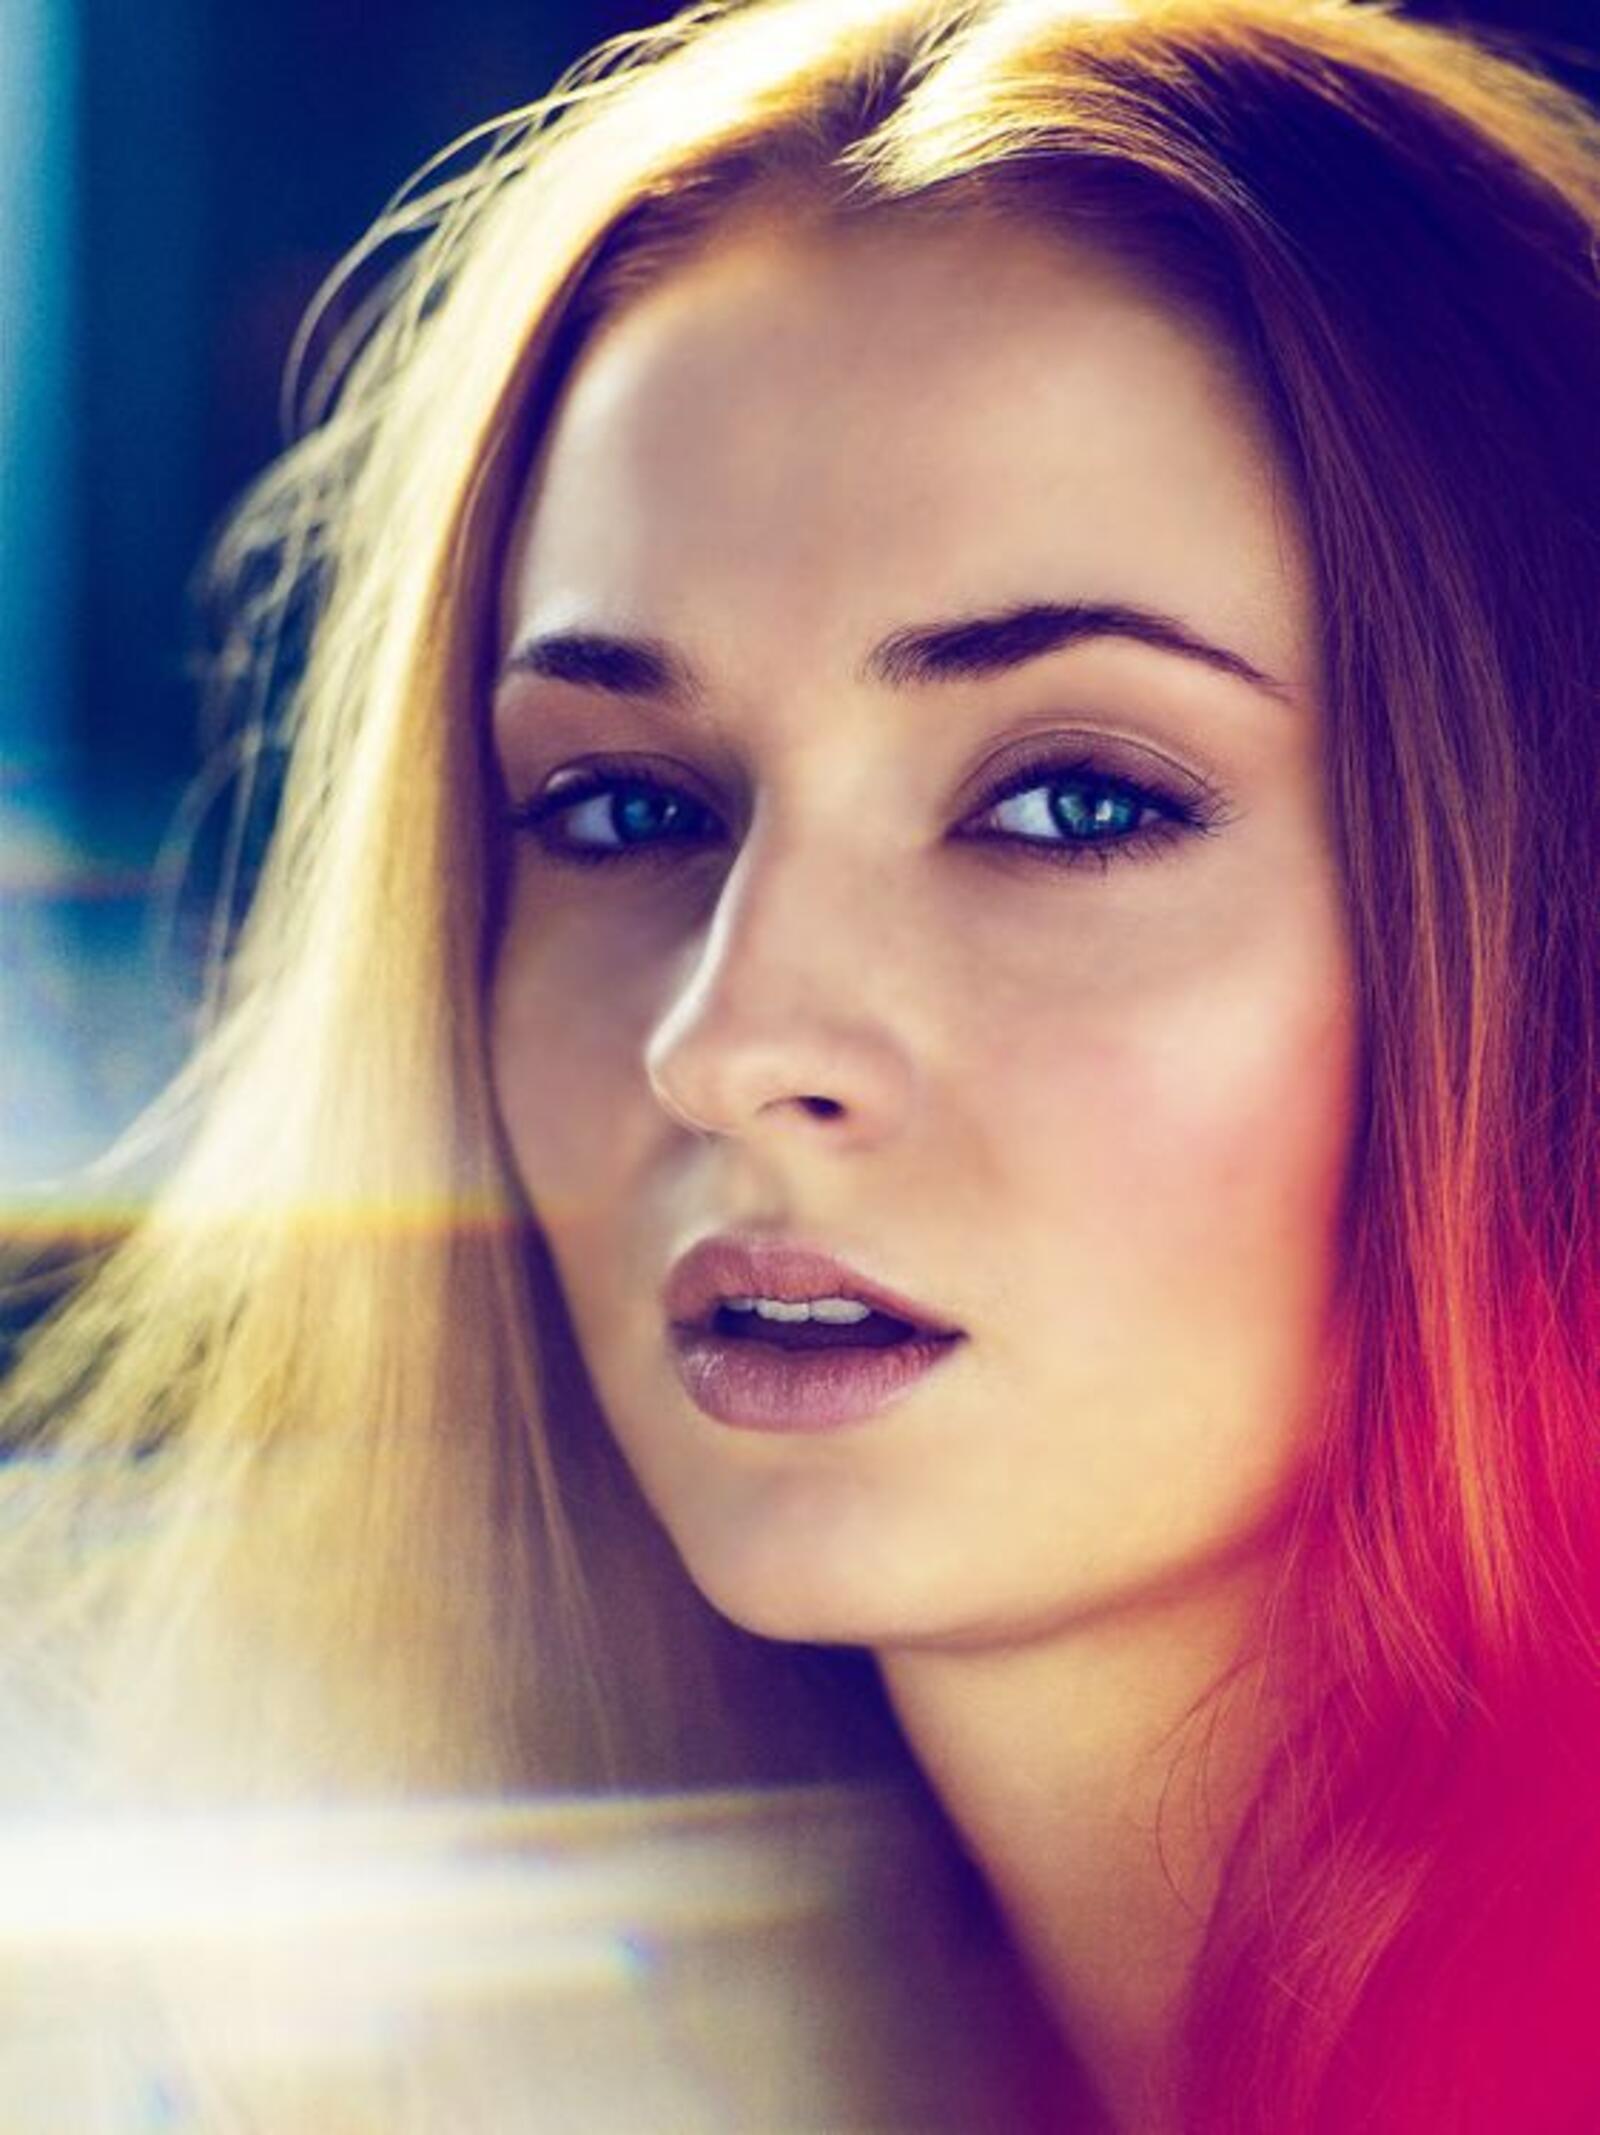 Wallpapers Sophie Turner actress open mouth on the desktop